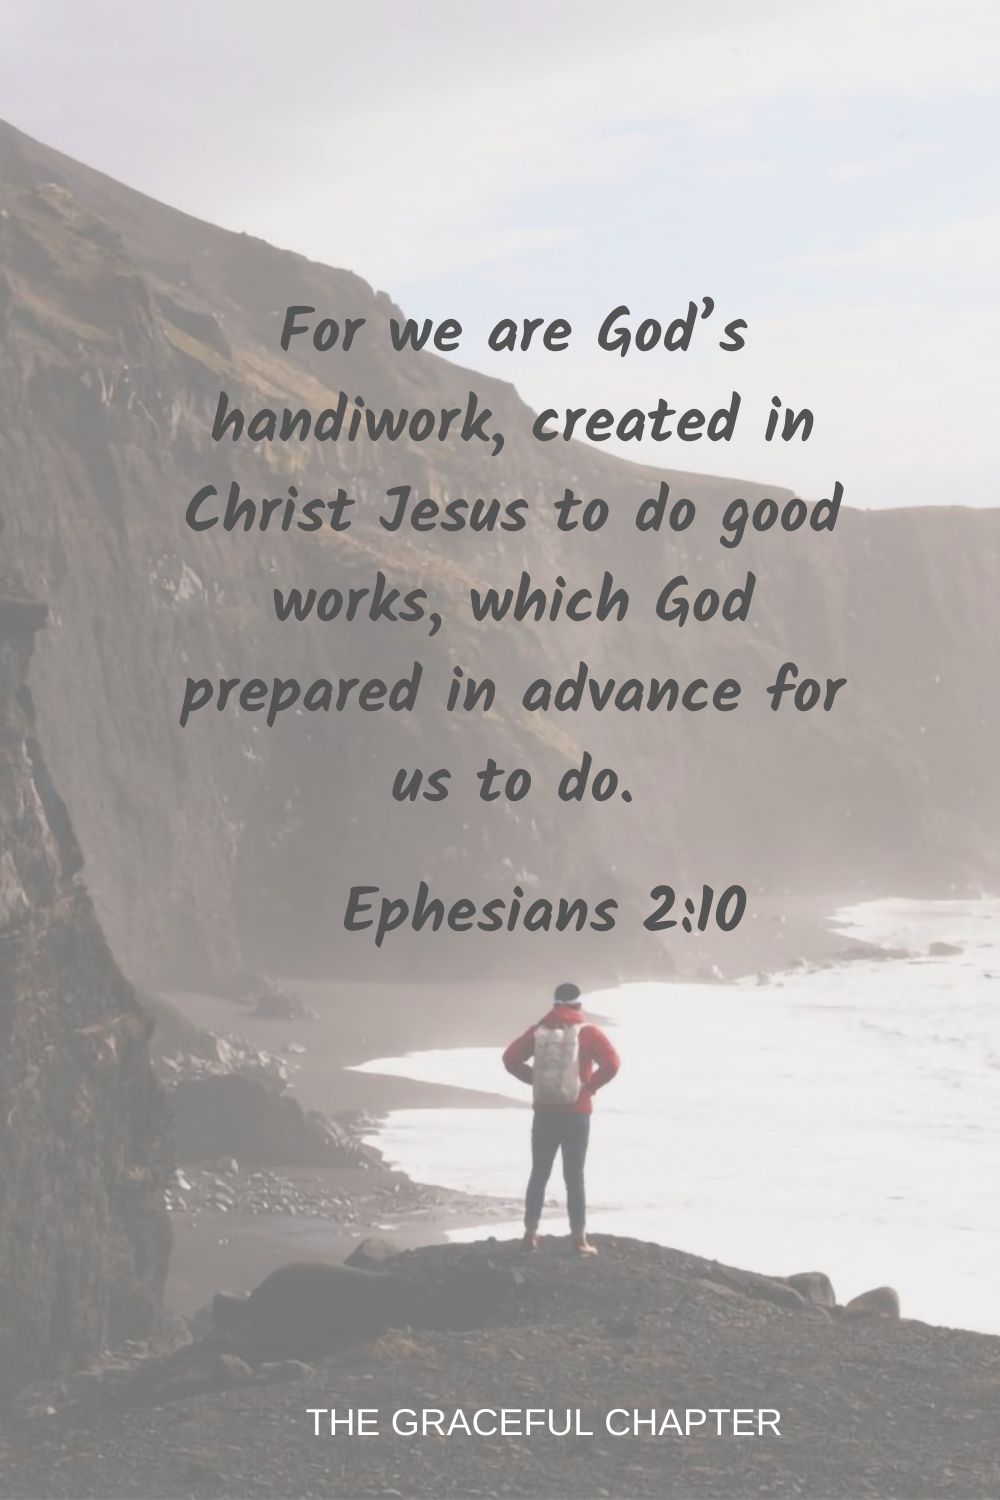 For we are God’s handiwork, created in Christ Jesus to do good works, which God prepared in advance for us to do. Ephesians 2:10